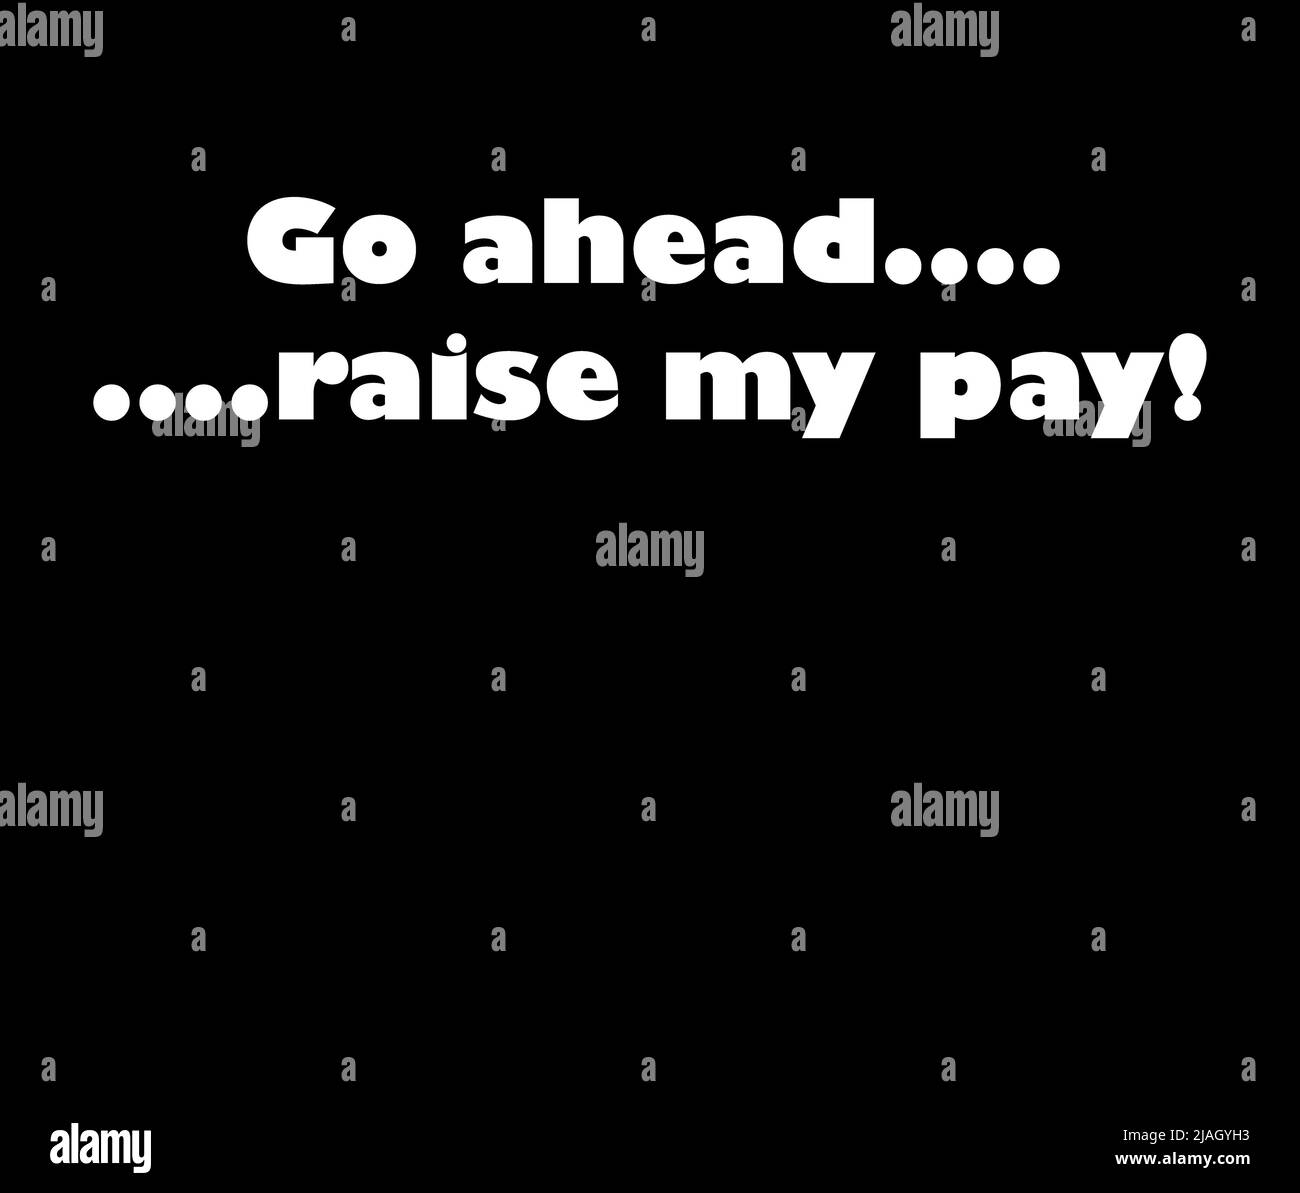 A light hearted play on words from a well known movie scene, here placing emphasis on asking for a wage rise. Stock Photo